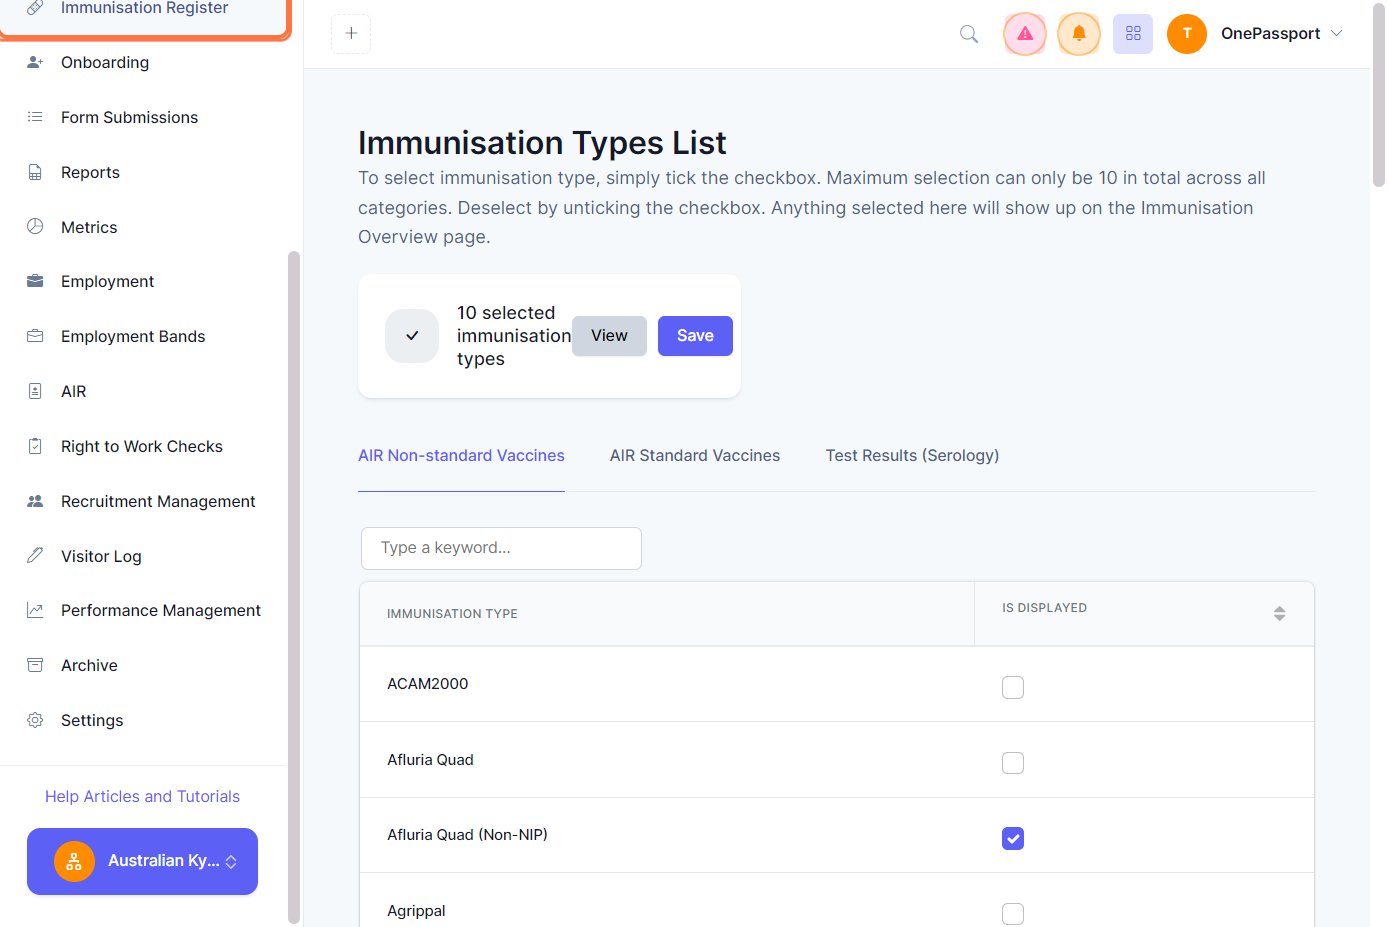 The saved Immunisation types in the Settings section should appear in the Immunisation Register. 